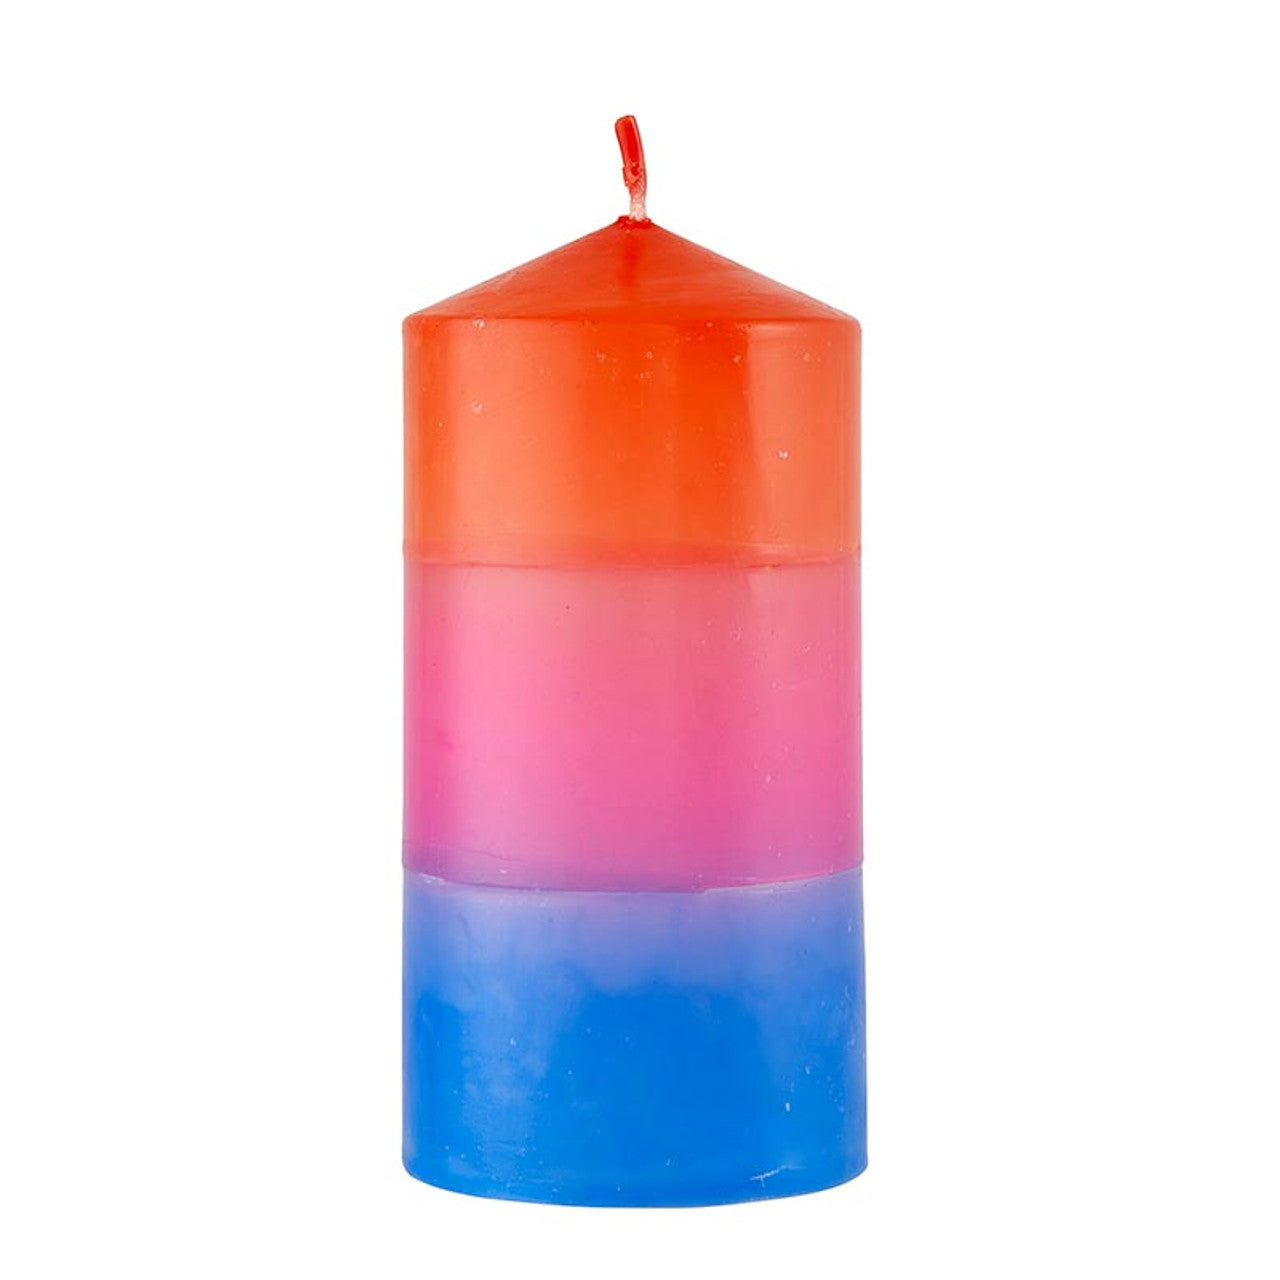 Mini Red-Pink-Blue Pillar Candle | Aesthetic Unscented Table Decor Cylindrical Candle 4.75"